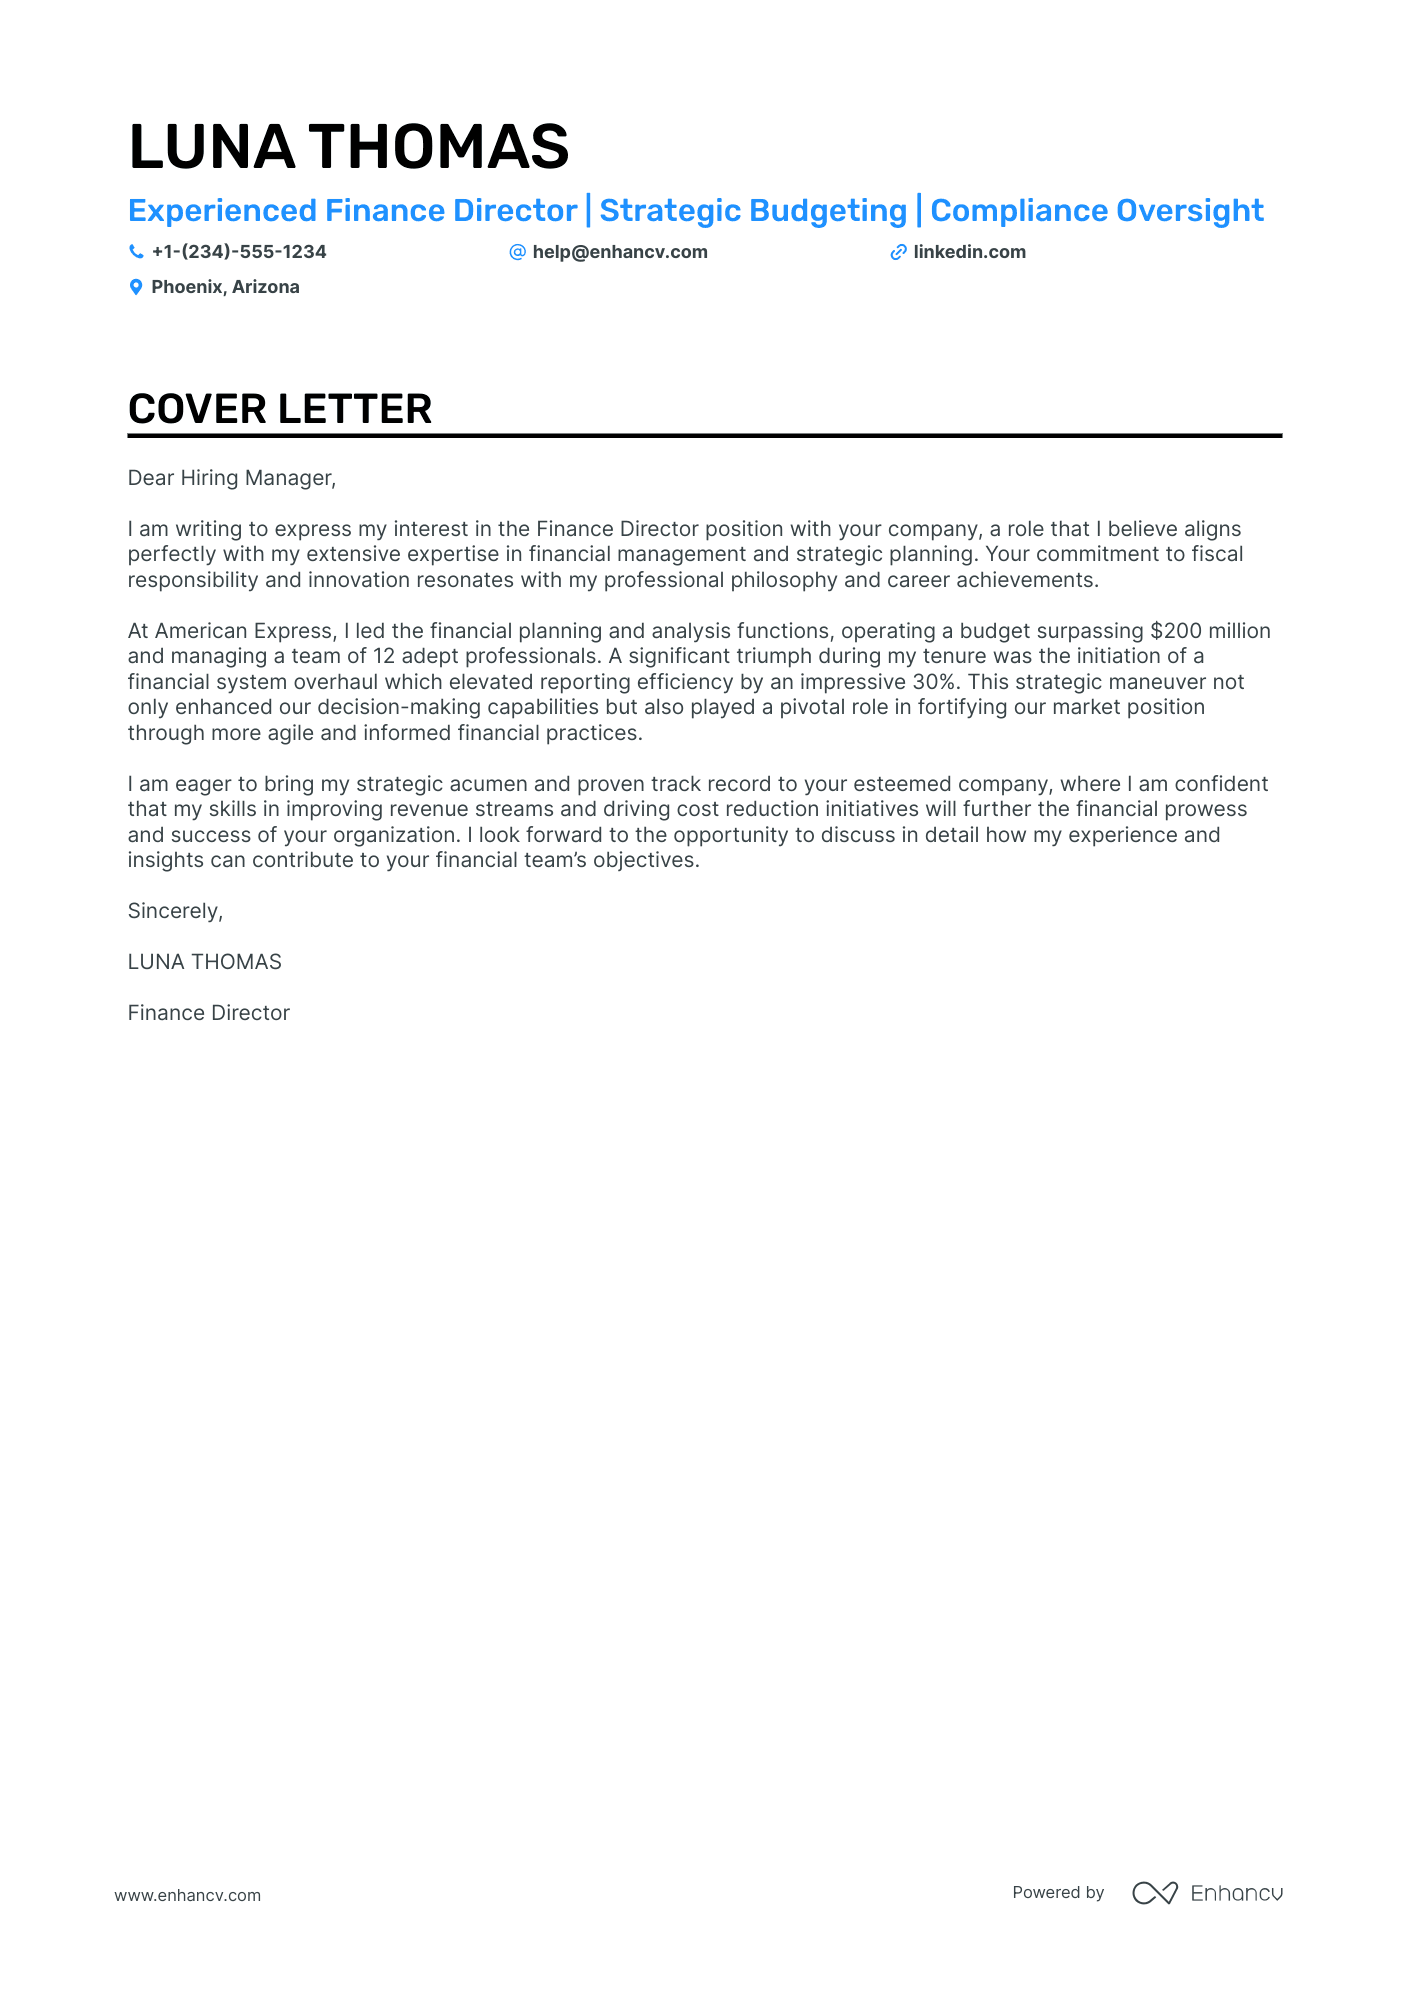 Director of Finance cover letter